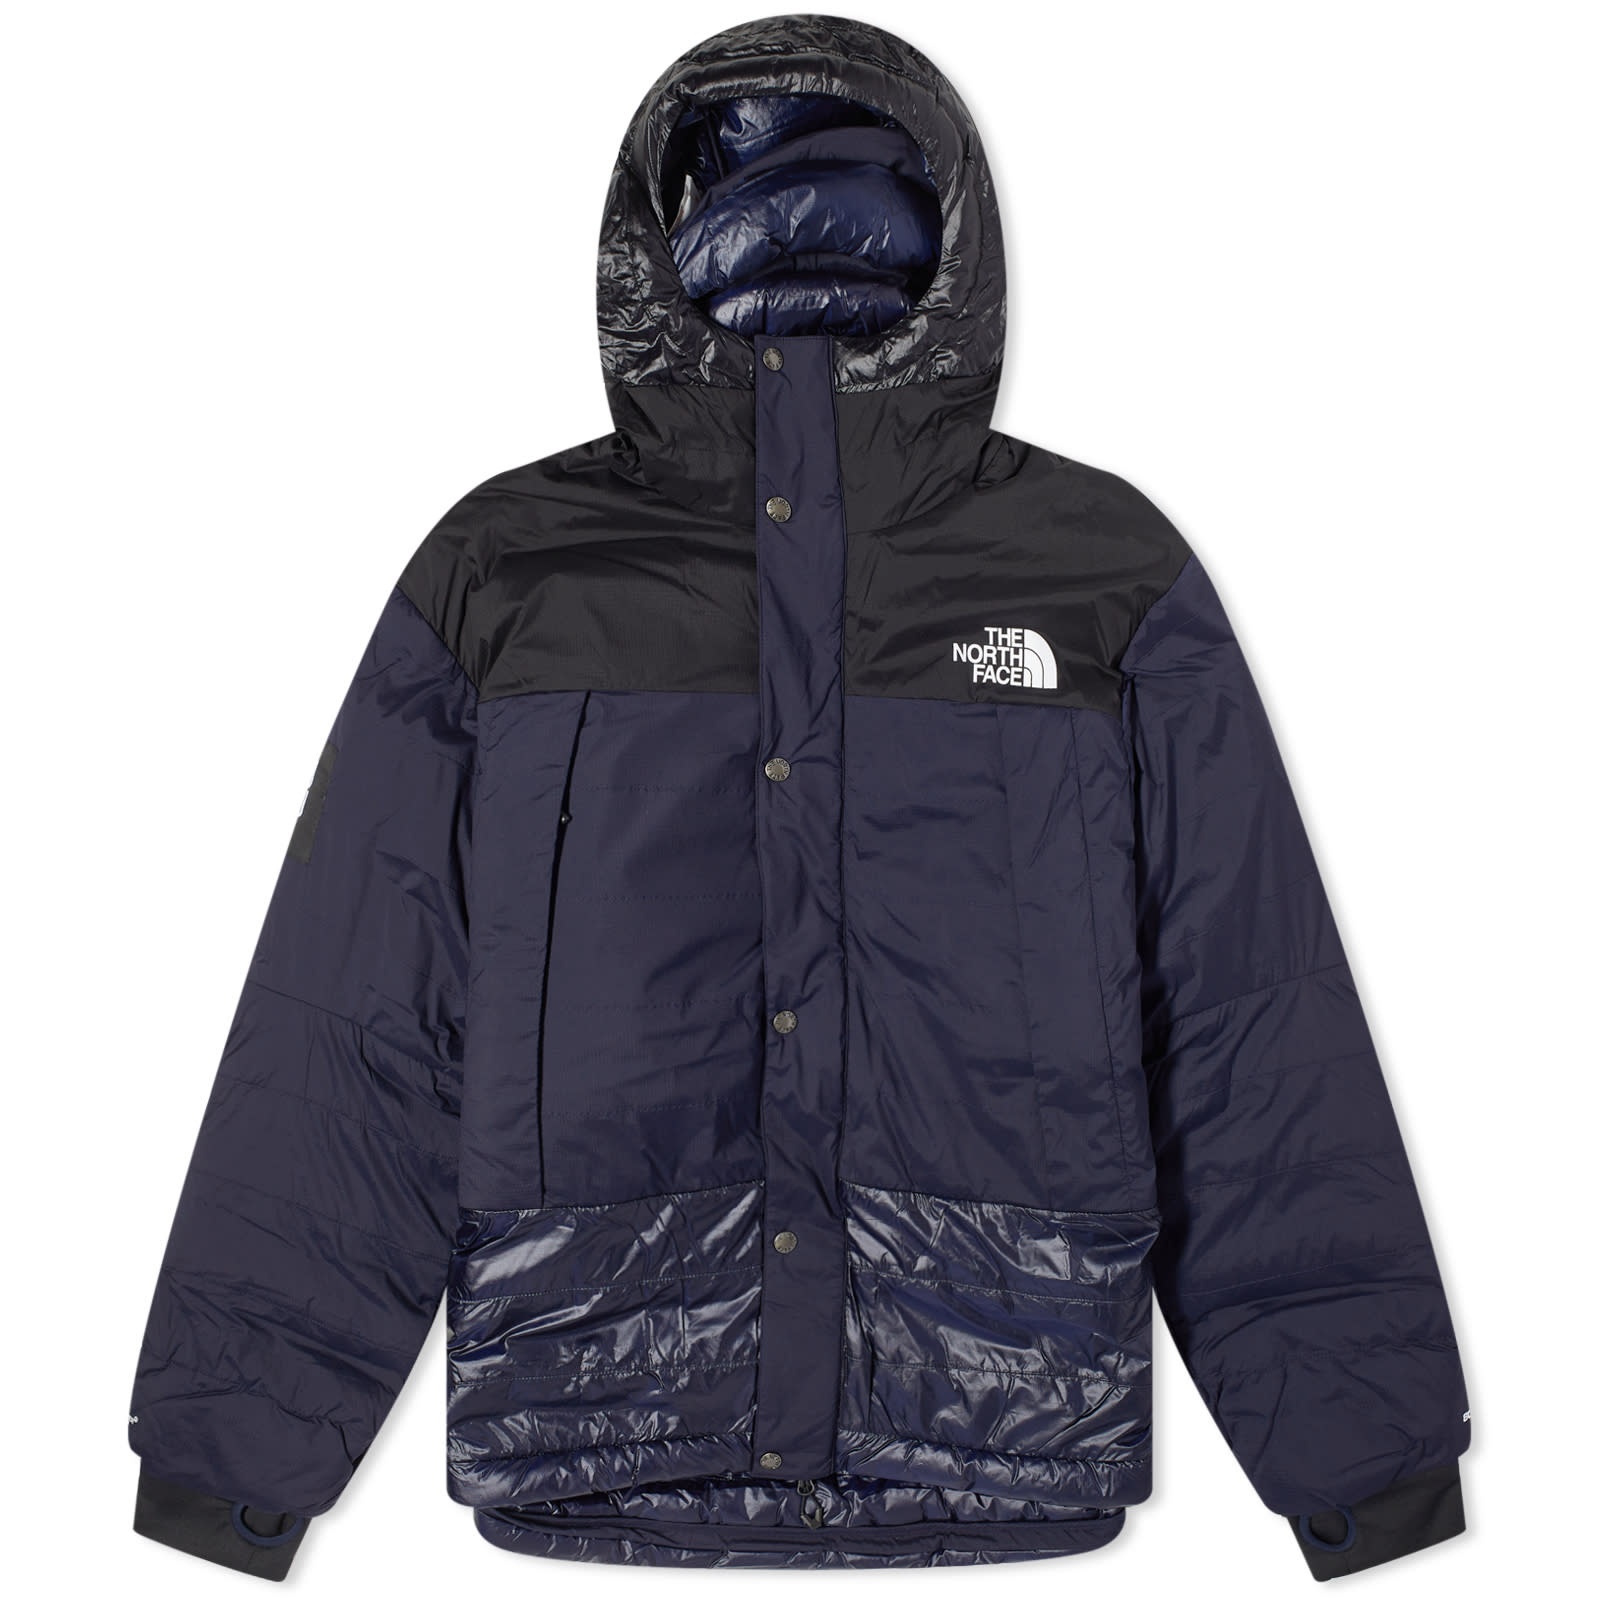 The North Face The North Face x Undercover 50/50 Mountain Jacket